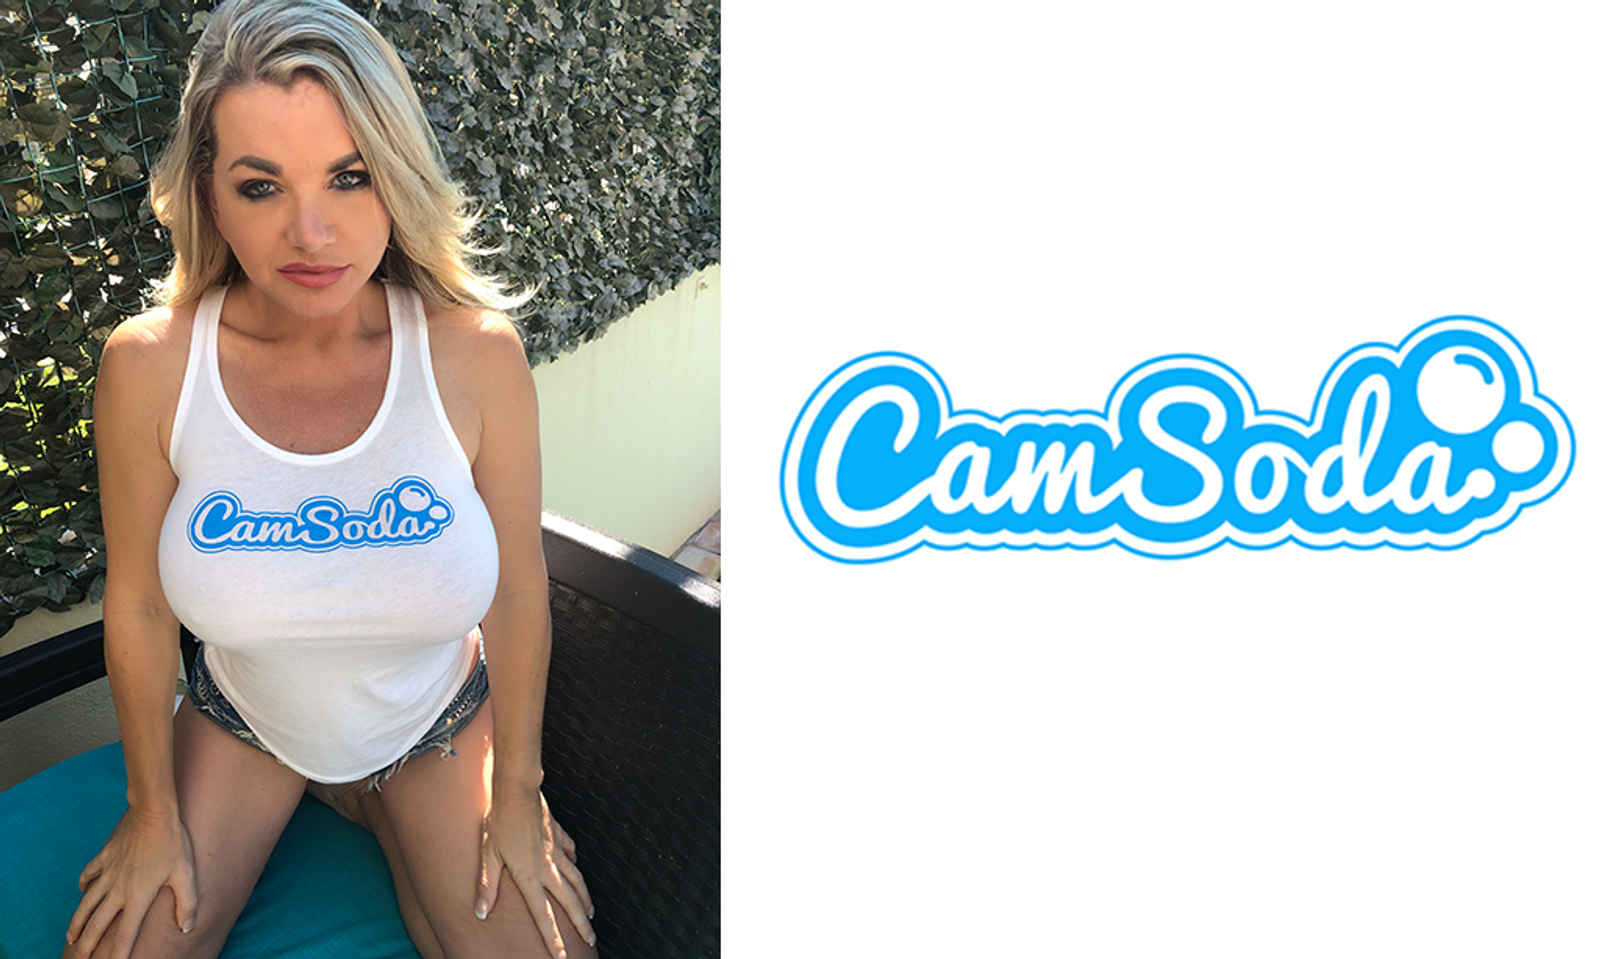 Vicky Vette to Make First CamSoda Appearance Tonight